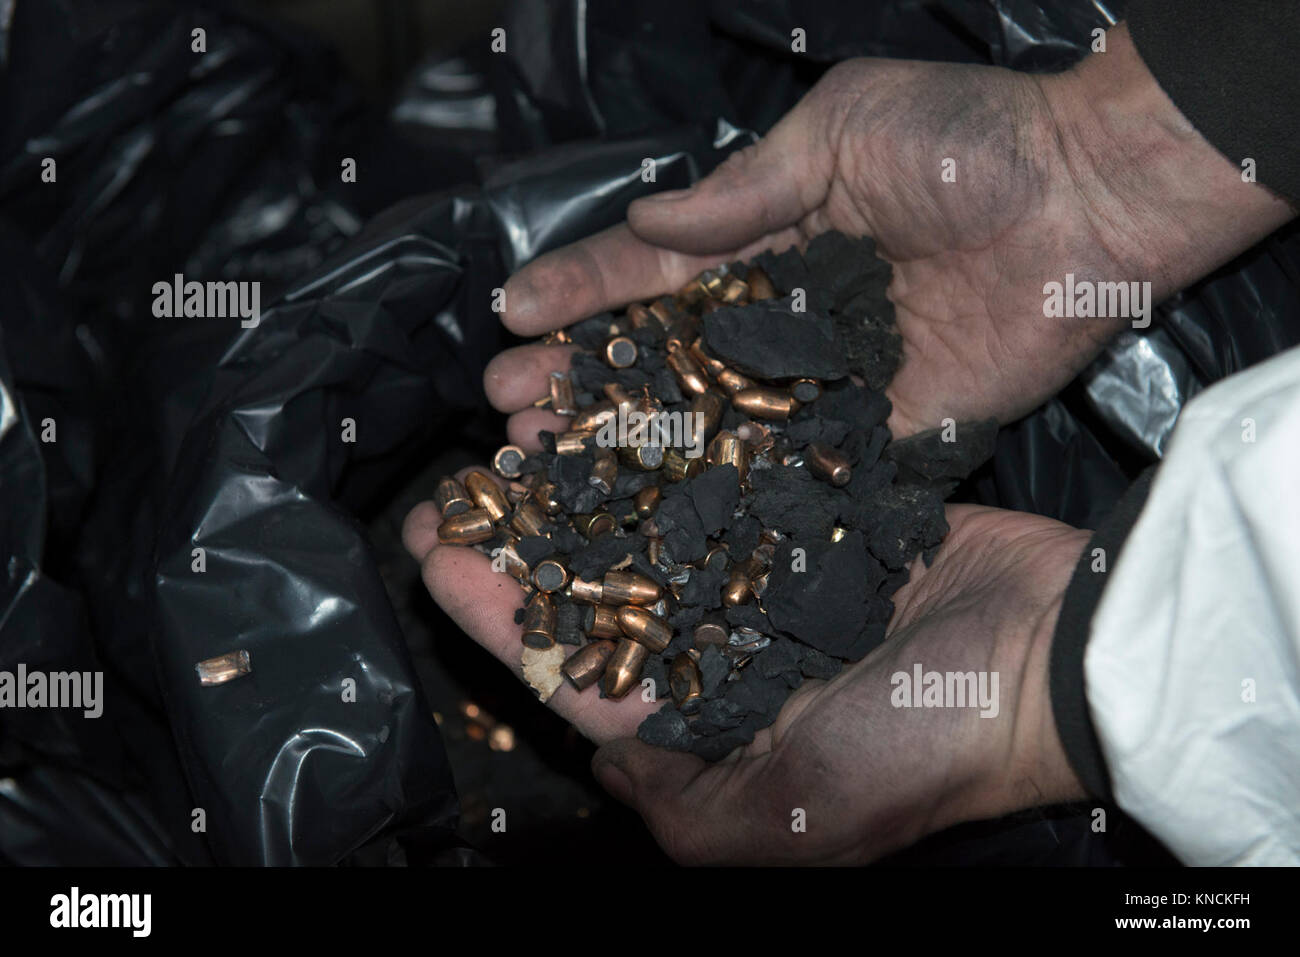 A contractor shows the bullets and rubber that he cleaned in the Training Support Center Benelux 25-meter indoor firing range, on Chièvres Air Base, Belgium, Dec. 6, 2017. In accordance with the U.S. Army and U.S. Army Europe Sustainable Range Program, the TSC Benelux 25-meter indoor firing range is regularly maintained, bullets are removed from the bullet catcher, and all lead, contaminated debris and hazardous material are safely disposed. (U.S. Army Stock Photo